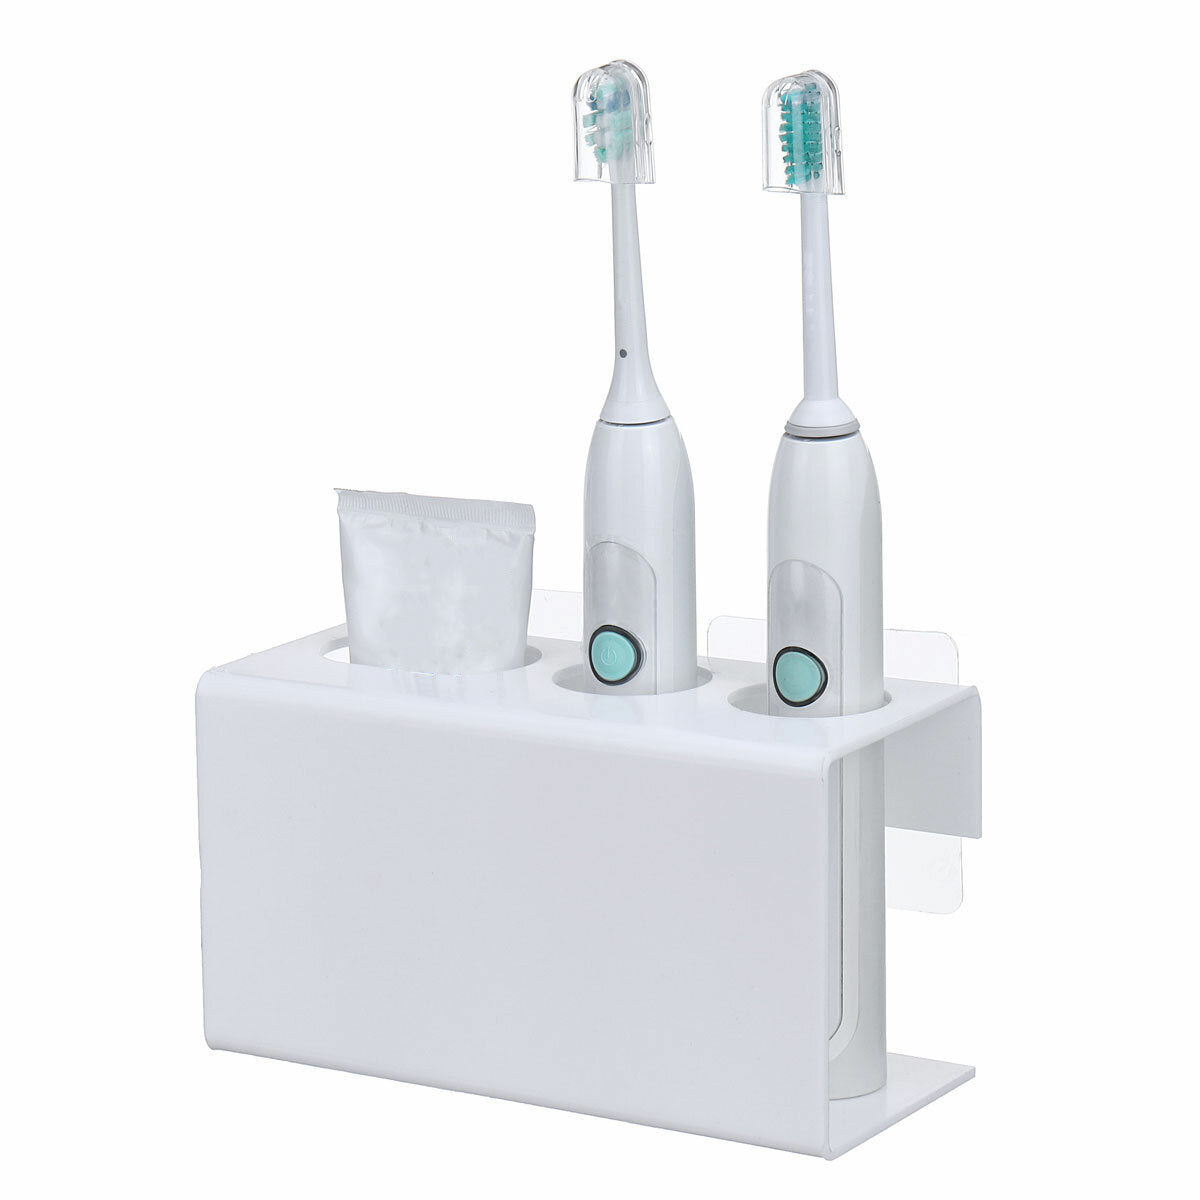 1pc Wall Mounted Electric Toothbrush Holder Toothpaste Holder Bathroom Organizer Detachable Bathroom Storage Caddy